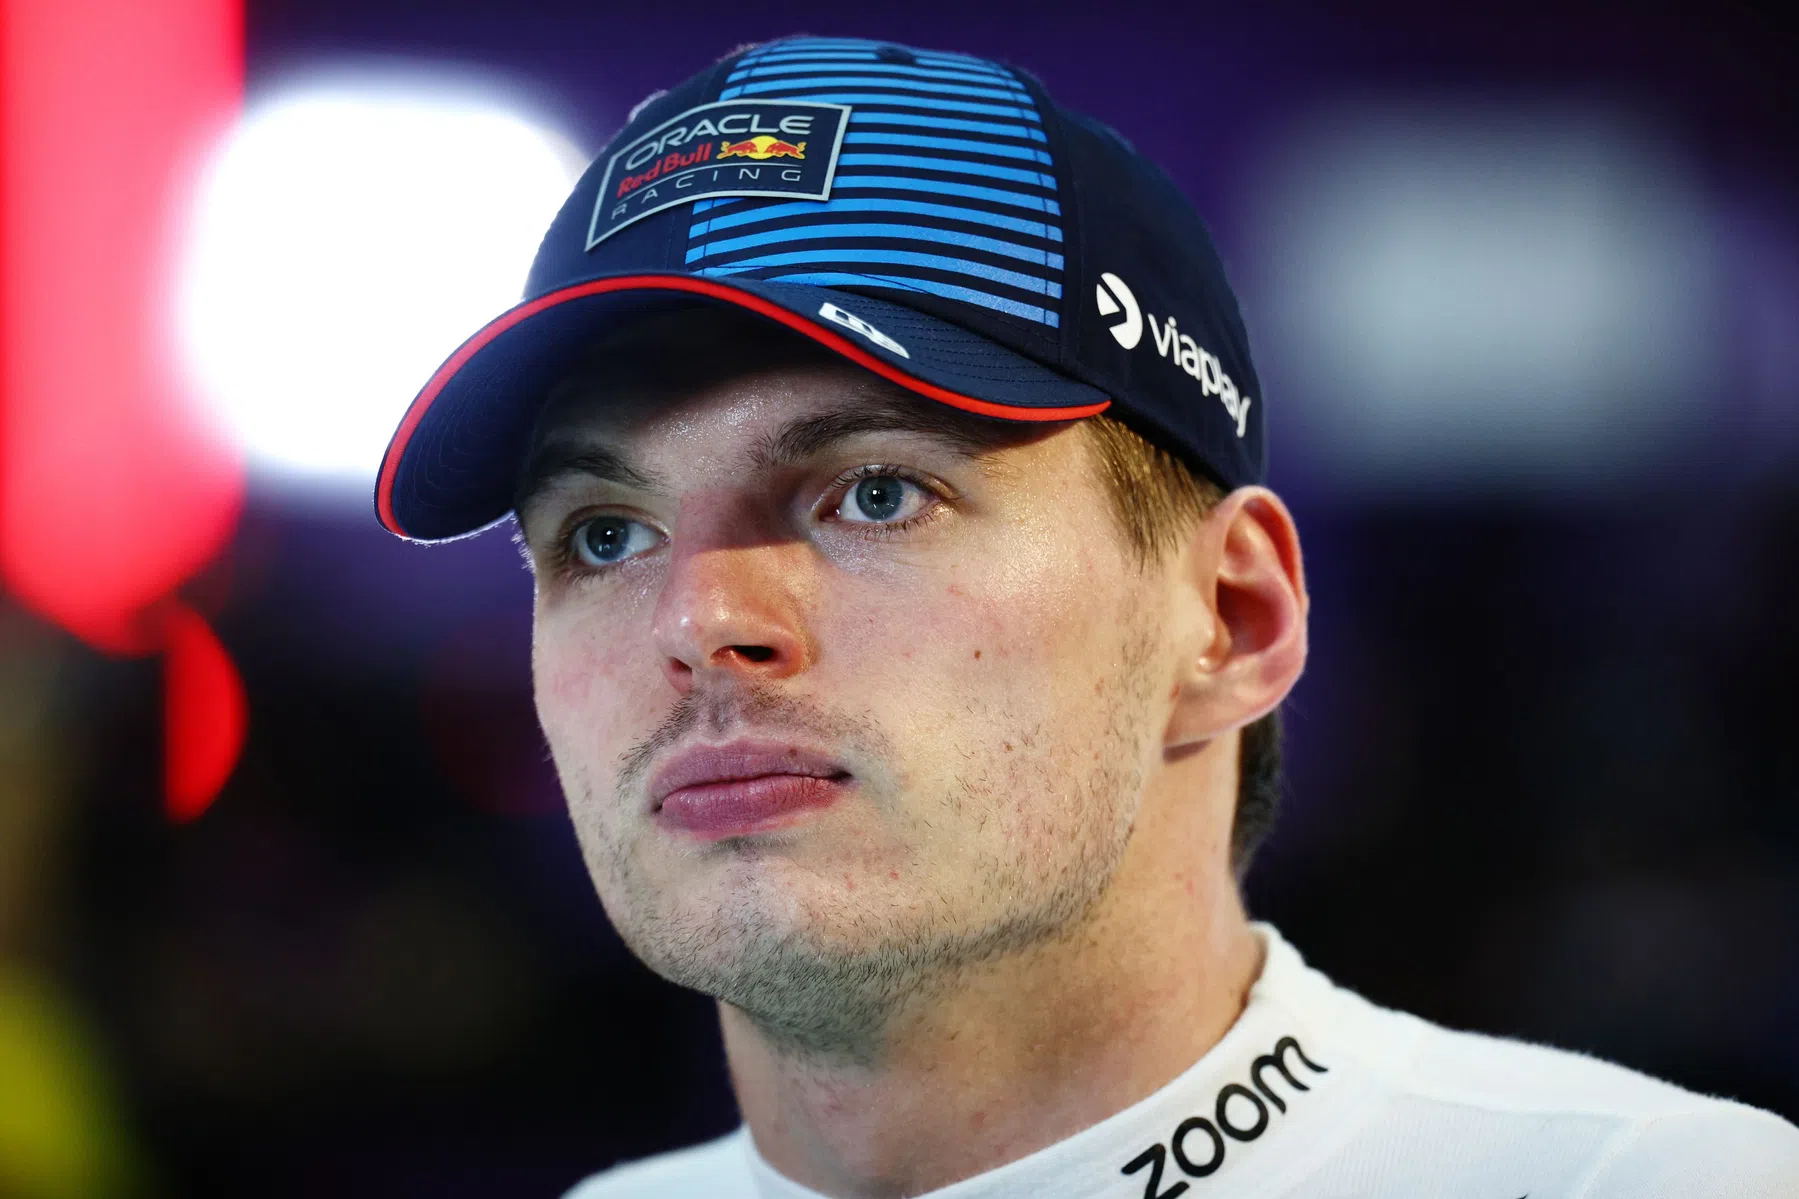 options for verstappen if he wants to leave red bull